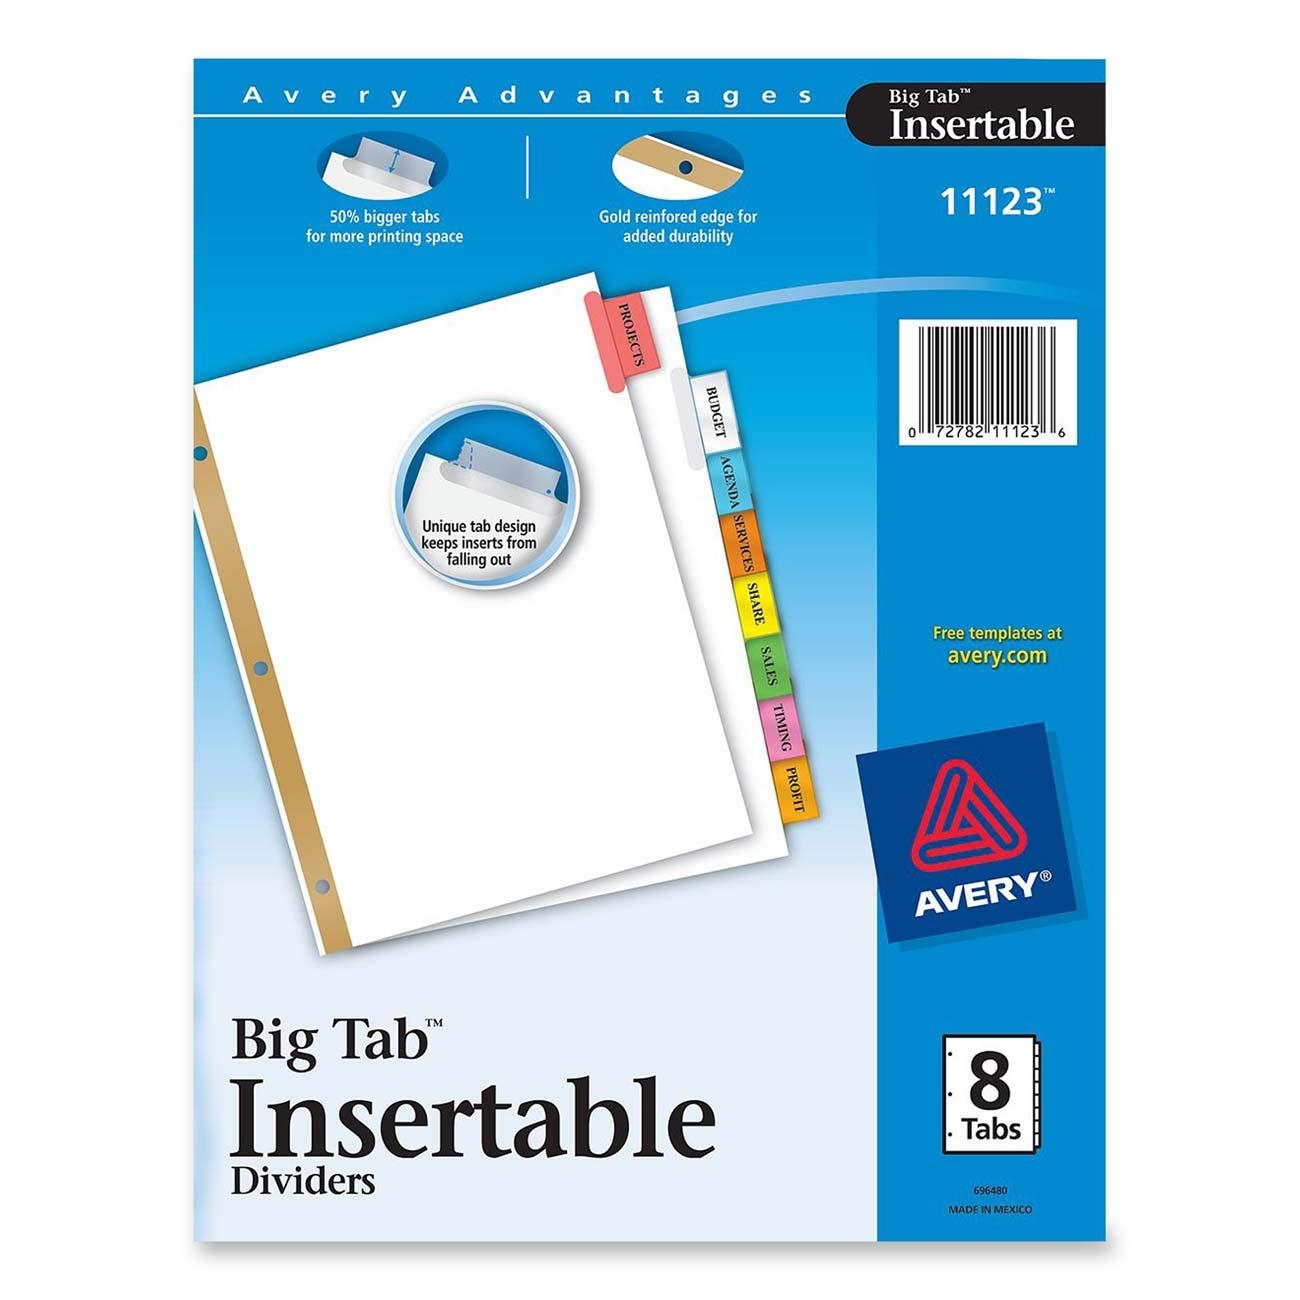 avery-worksaver-big-tab-insertable-tab-divider-ld-products